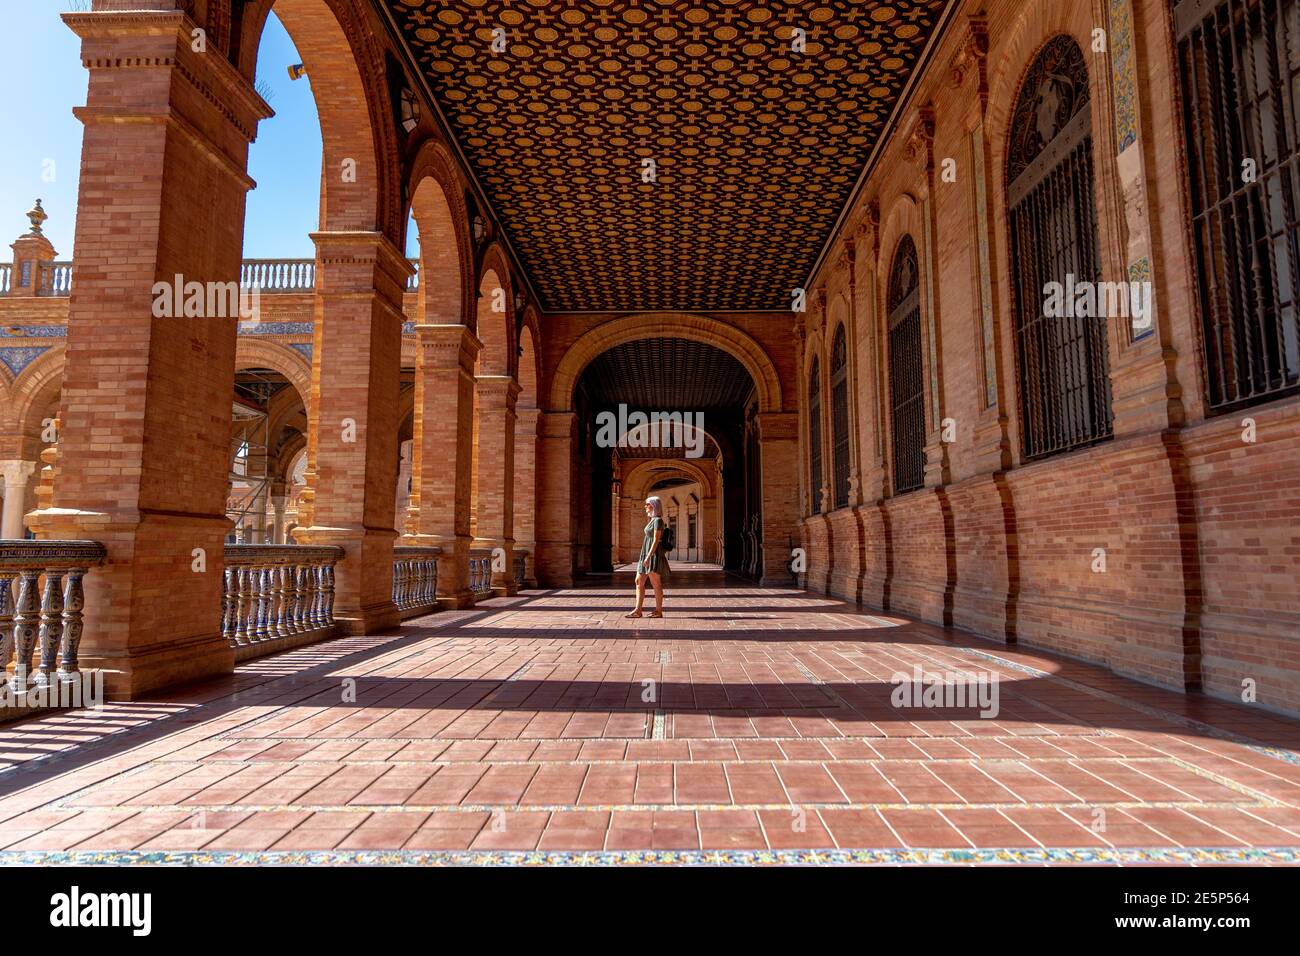 Sevilla, Plaza de España. Architectural details of the palace in the most known square of Seville (Spain). Sunny day with blue sky. Stock Photo